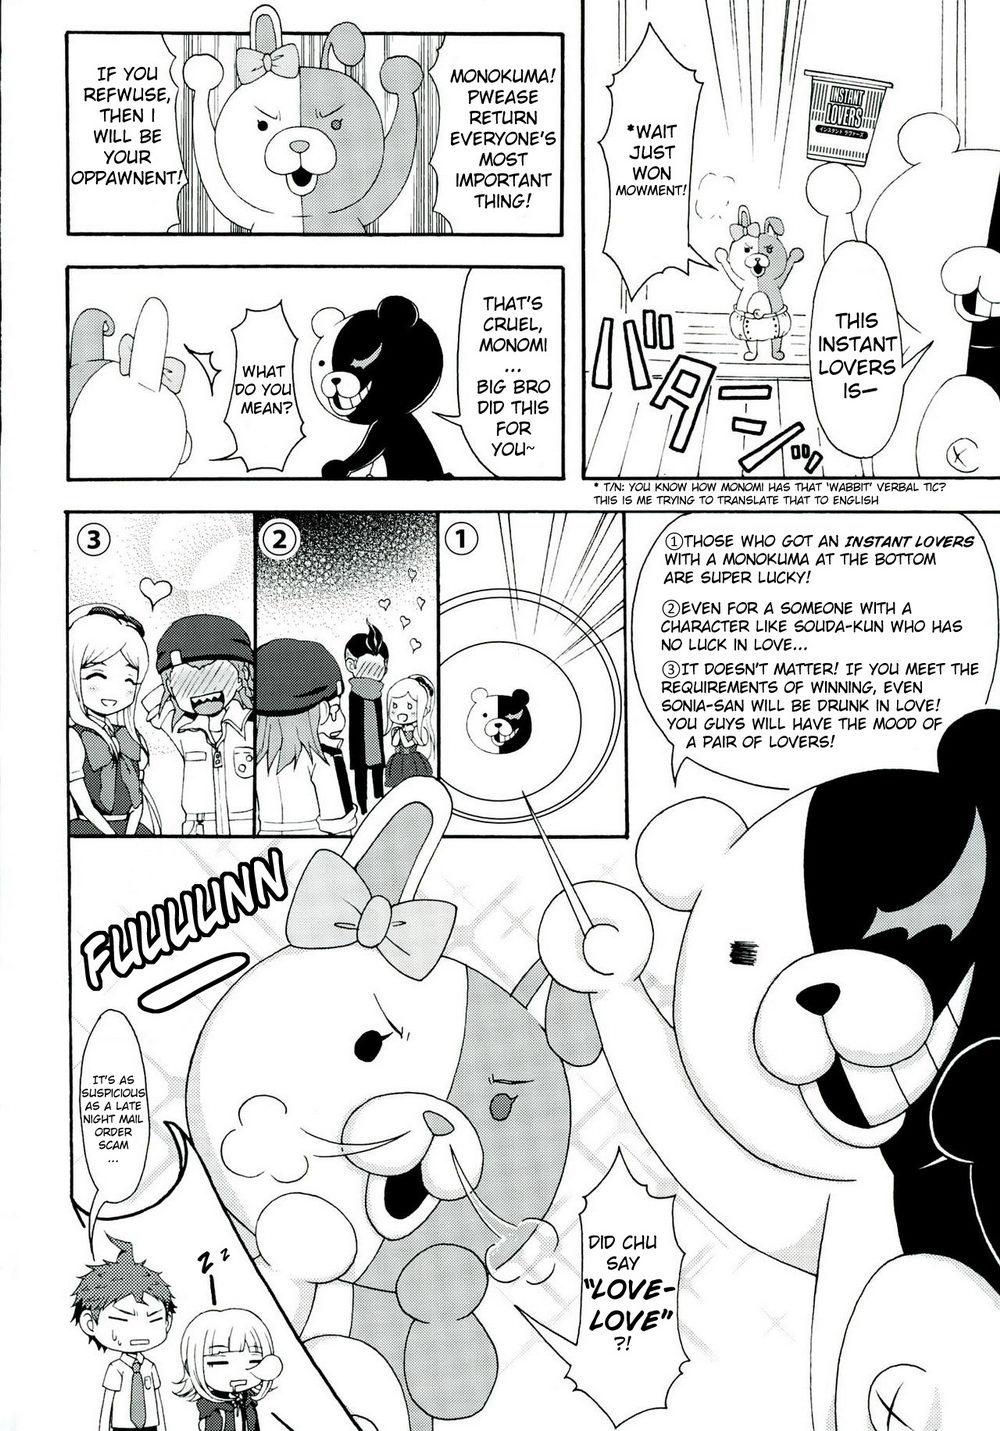 Outside INSTANT LOVERS - Danganronpa Old Young - Page 10